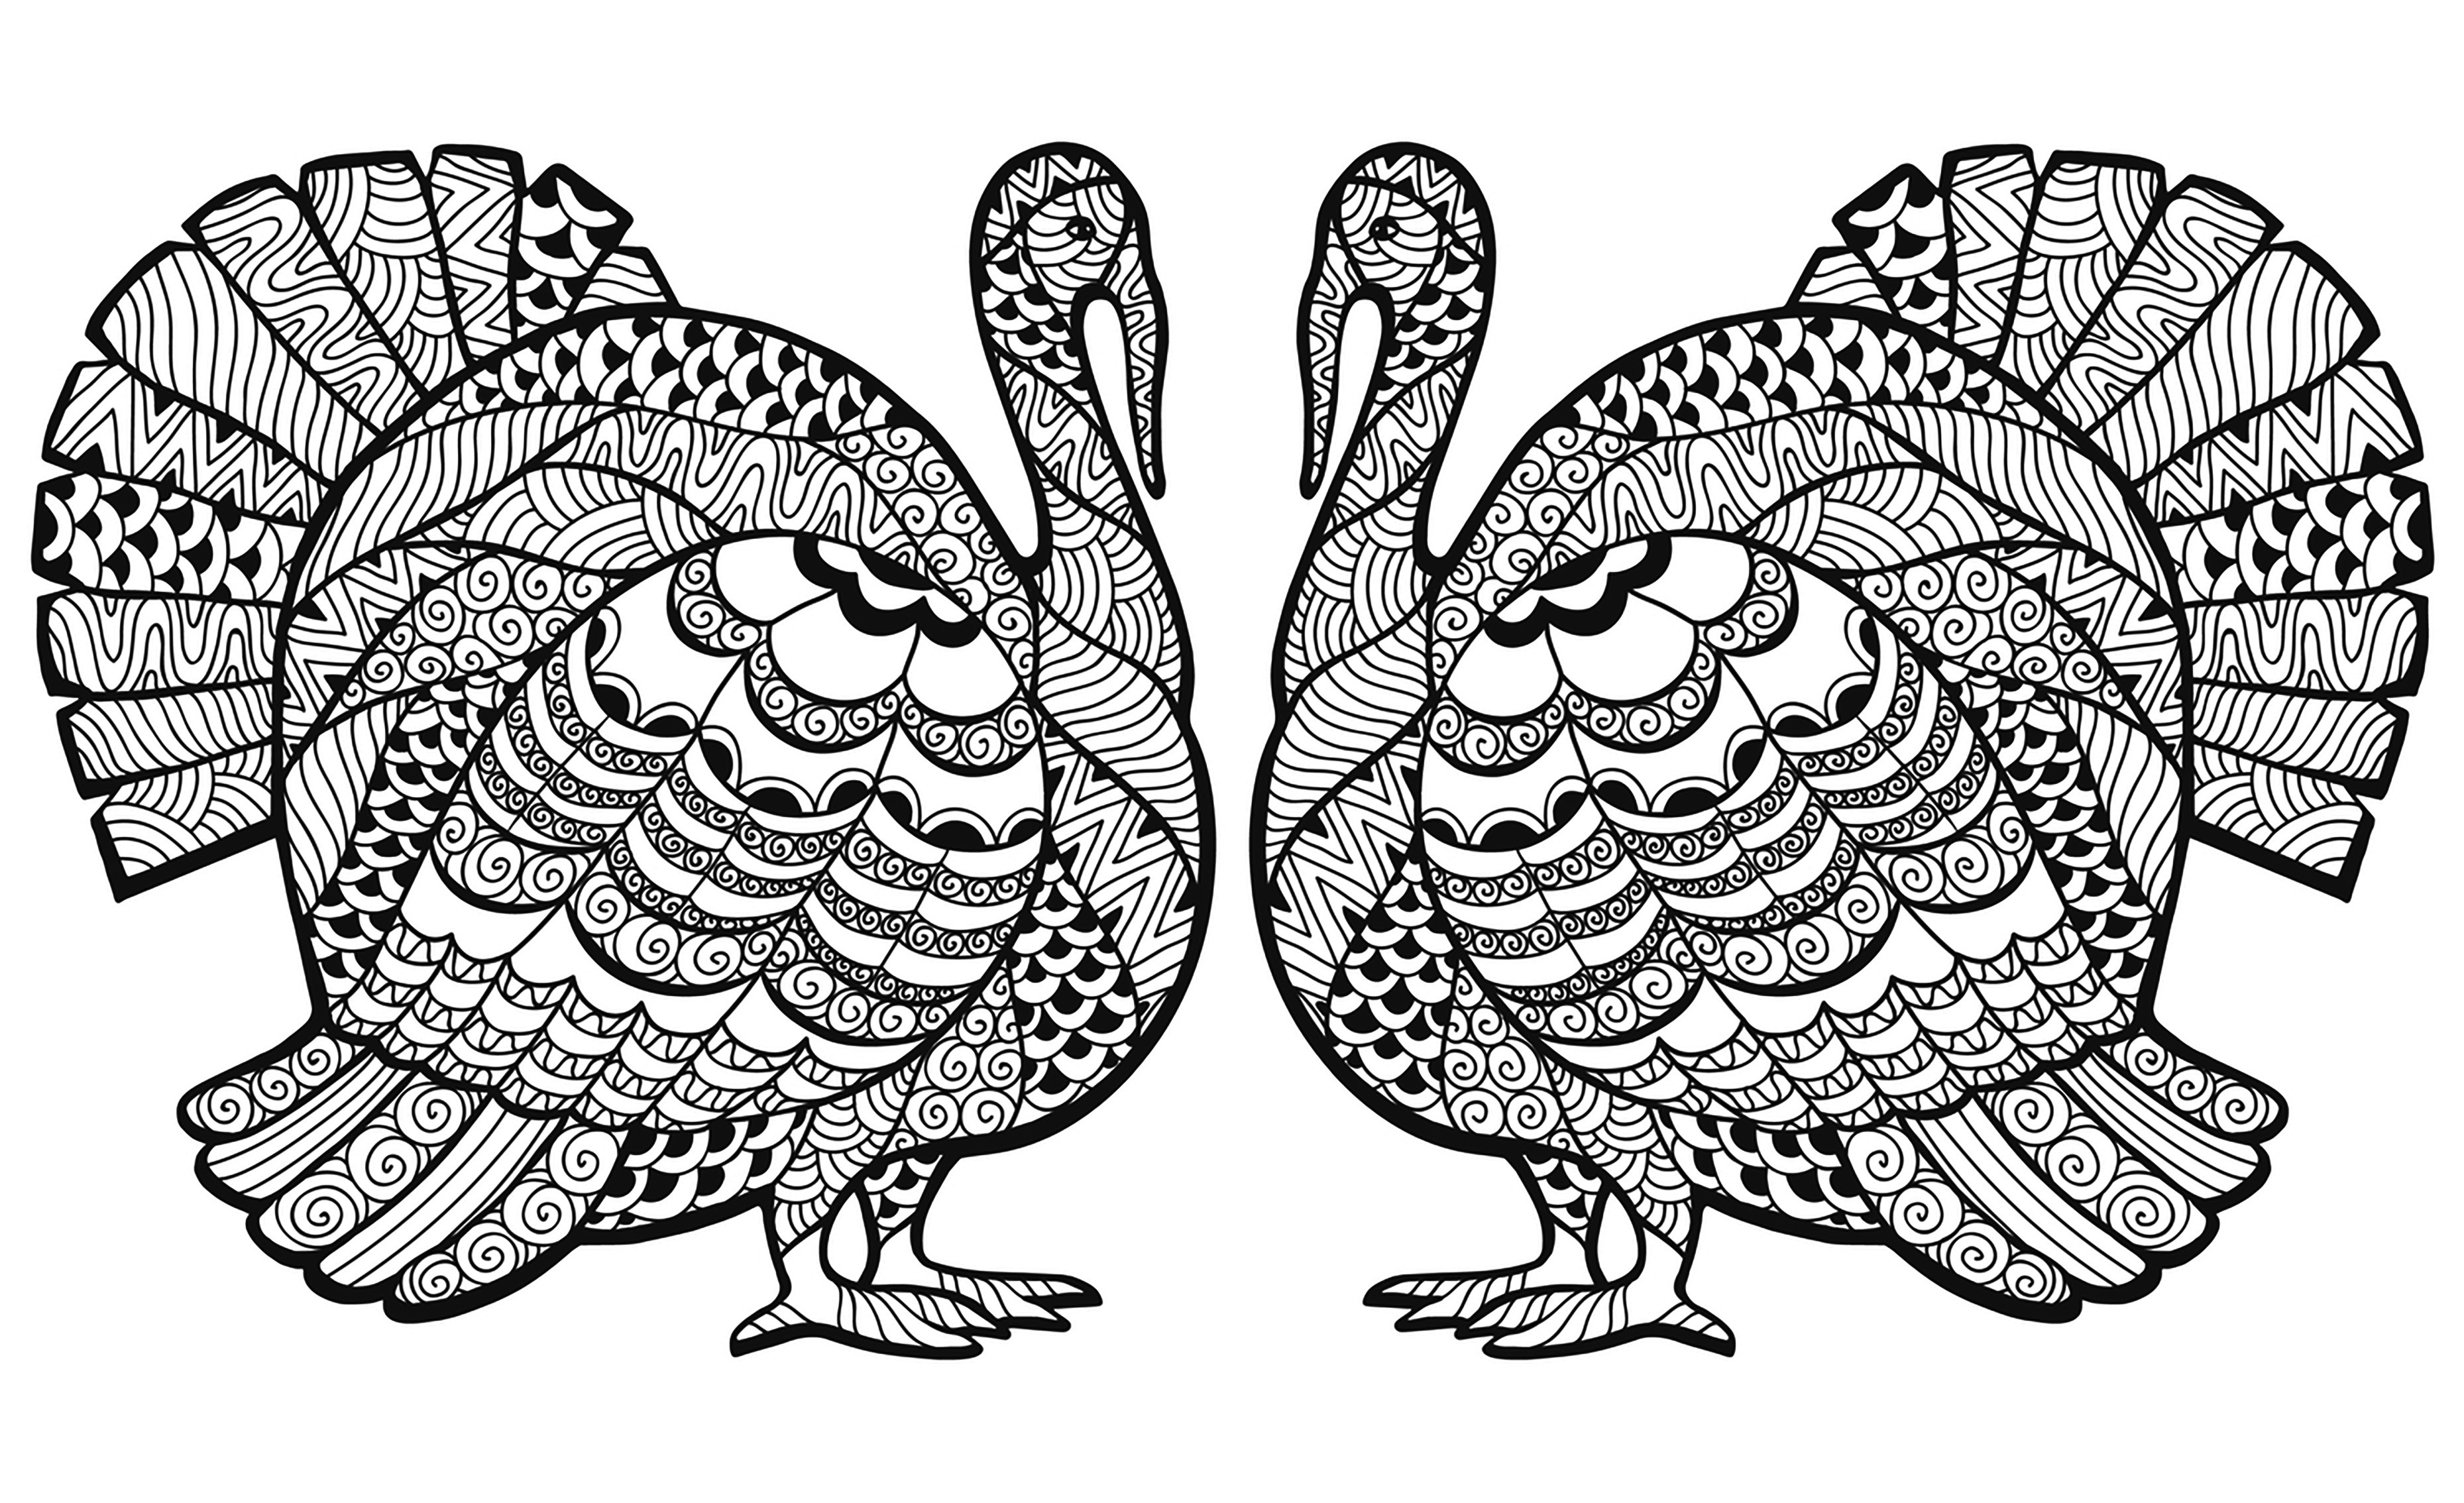 Turkey Coloring Pages For Adults
 Double Turkey Zentangle Coloring sheet Thanksgiving